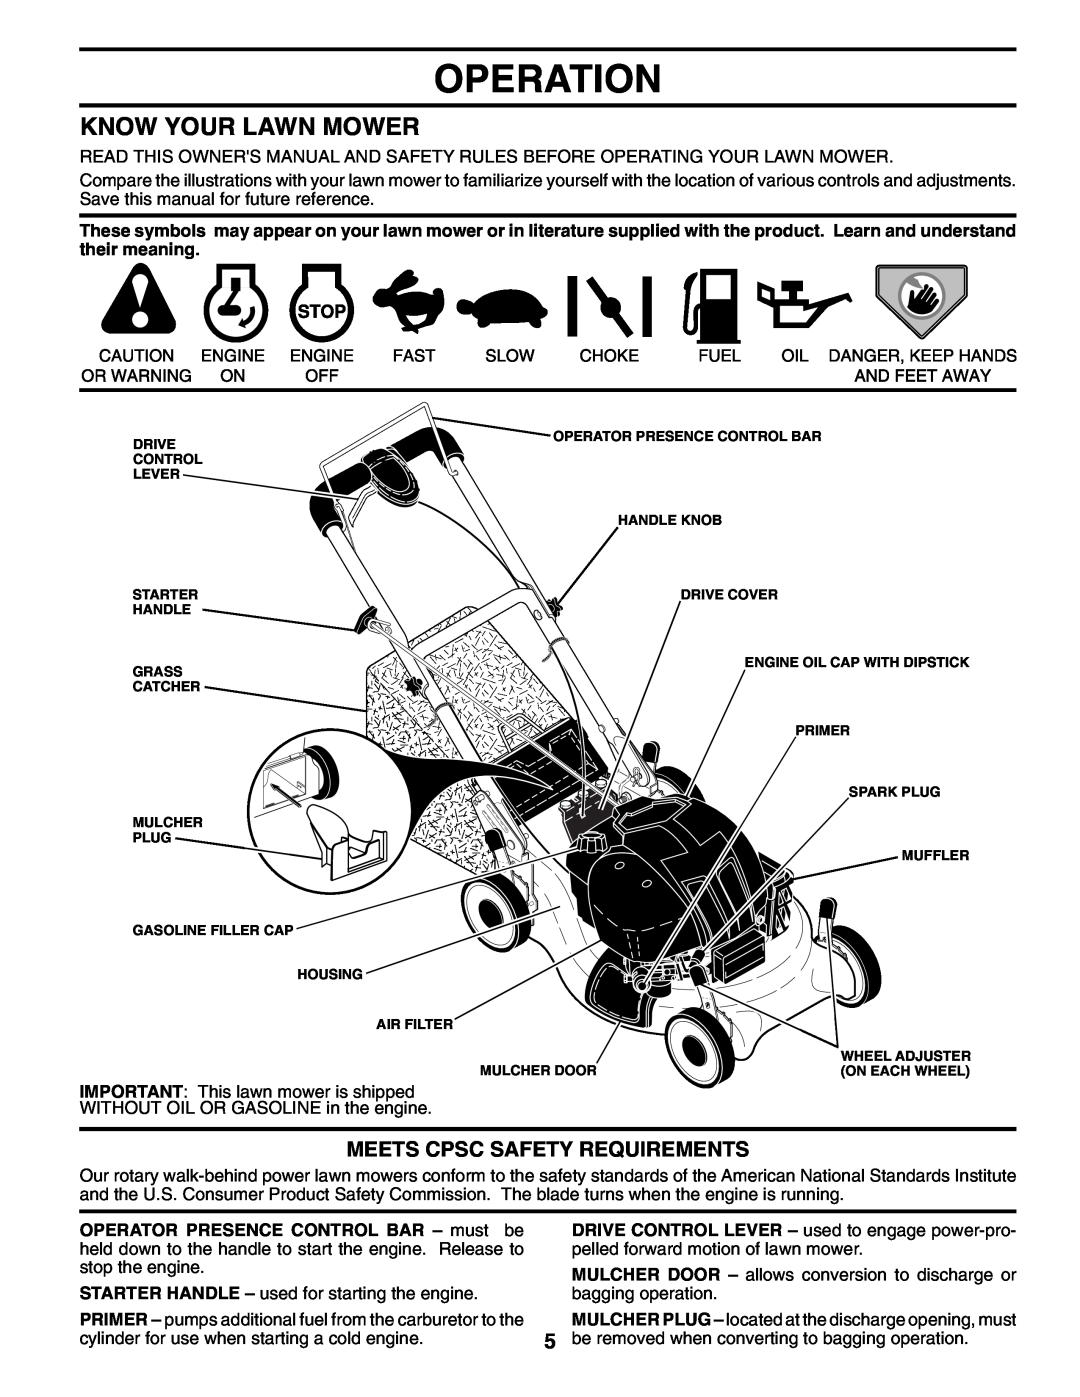 Husqvarna 7021RS owner manual Operation, Know Your Lawn Mower, Meets Cpsc Safety Requirements 